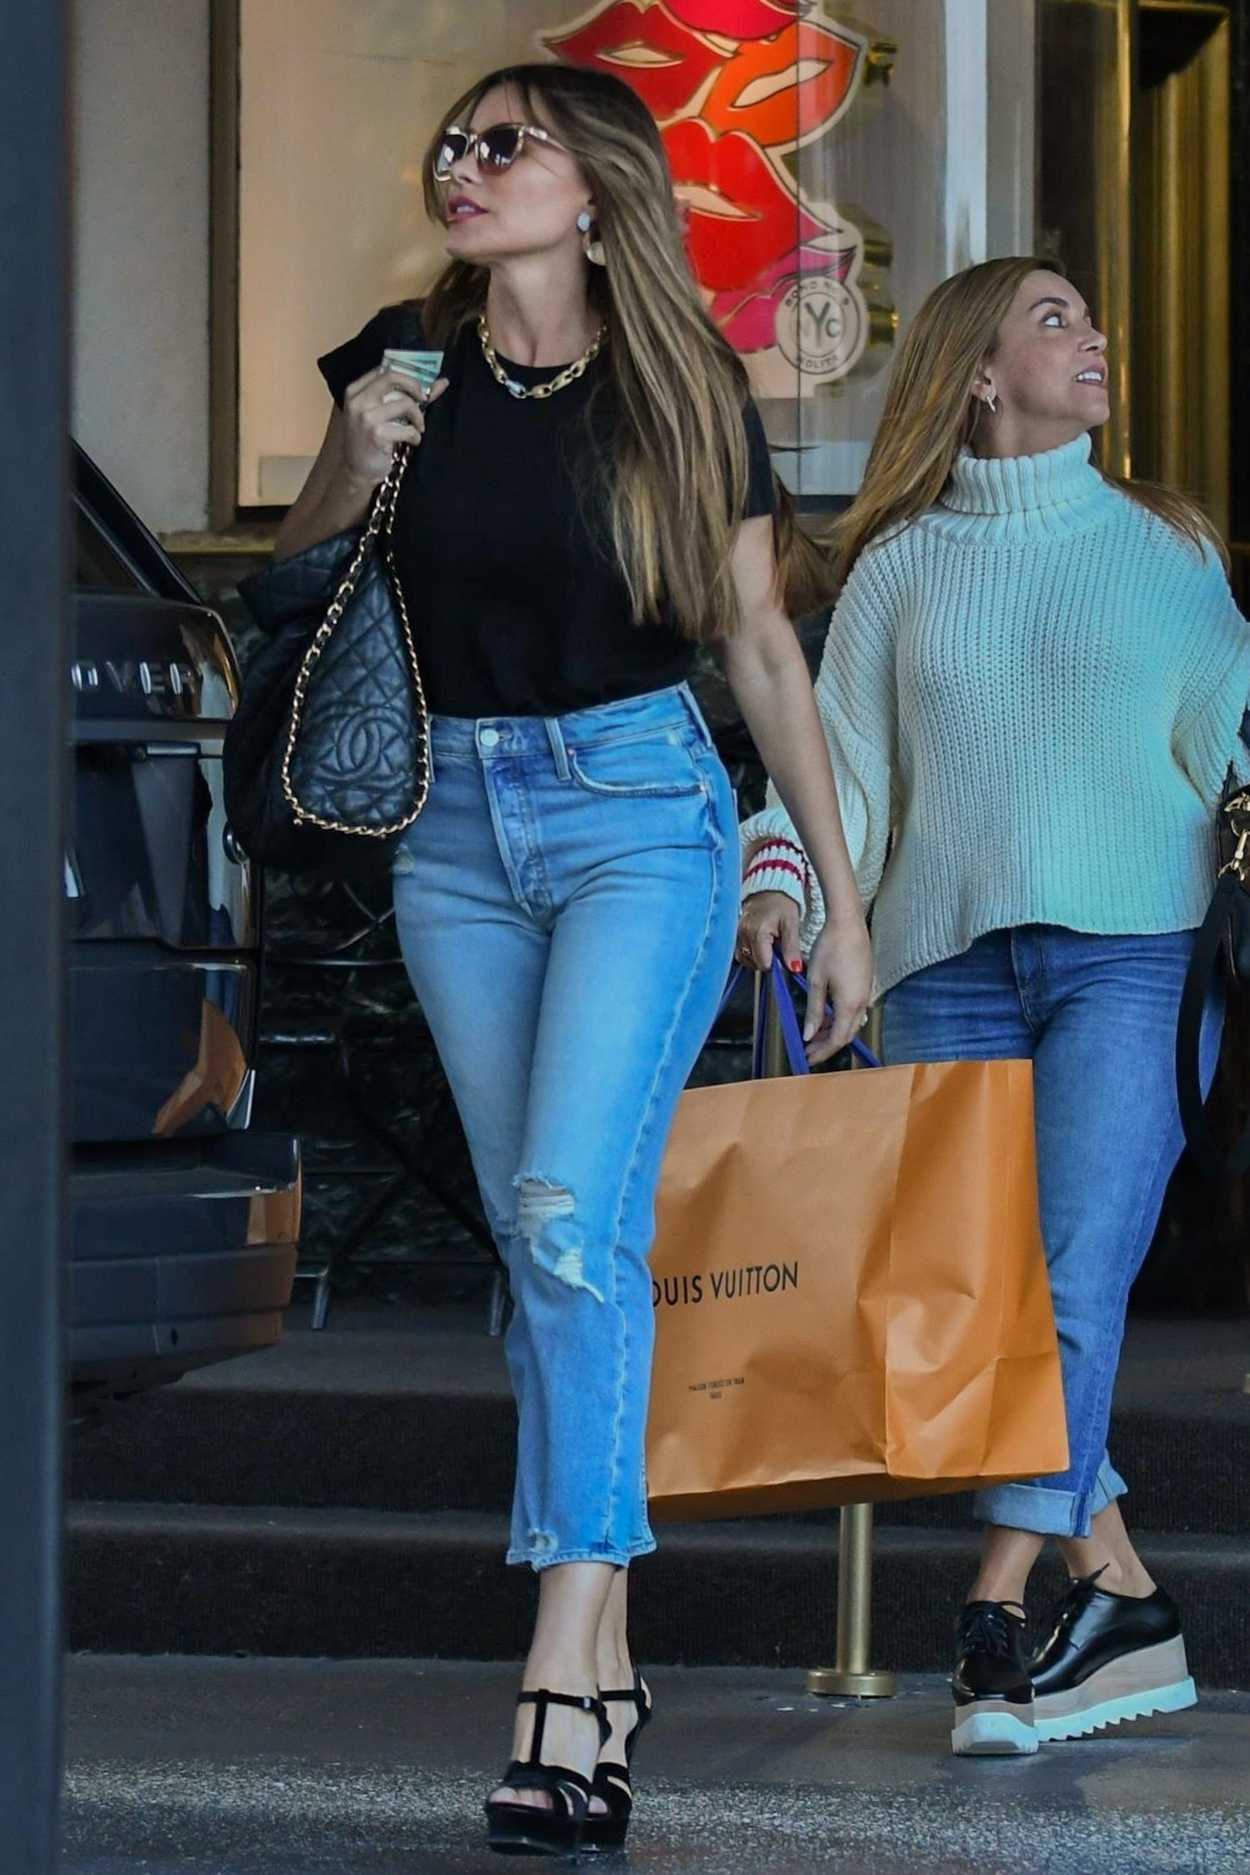 Sofia Vergara in a Blue Ripped Jeans Goes Shopping at Saks Fifth Avenue